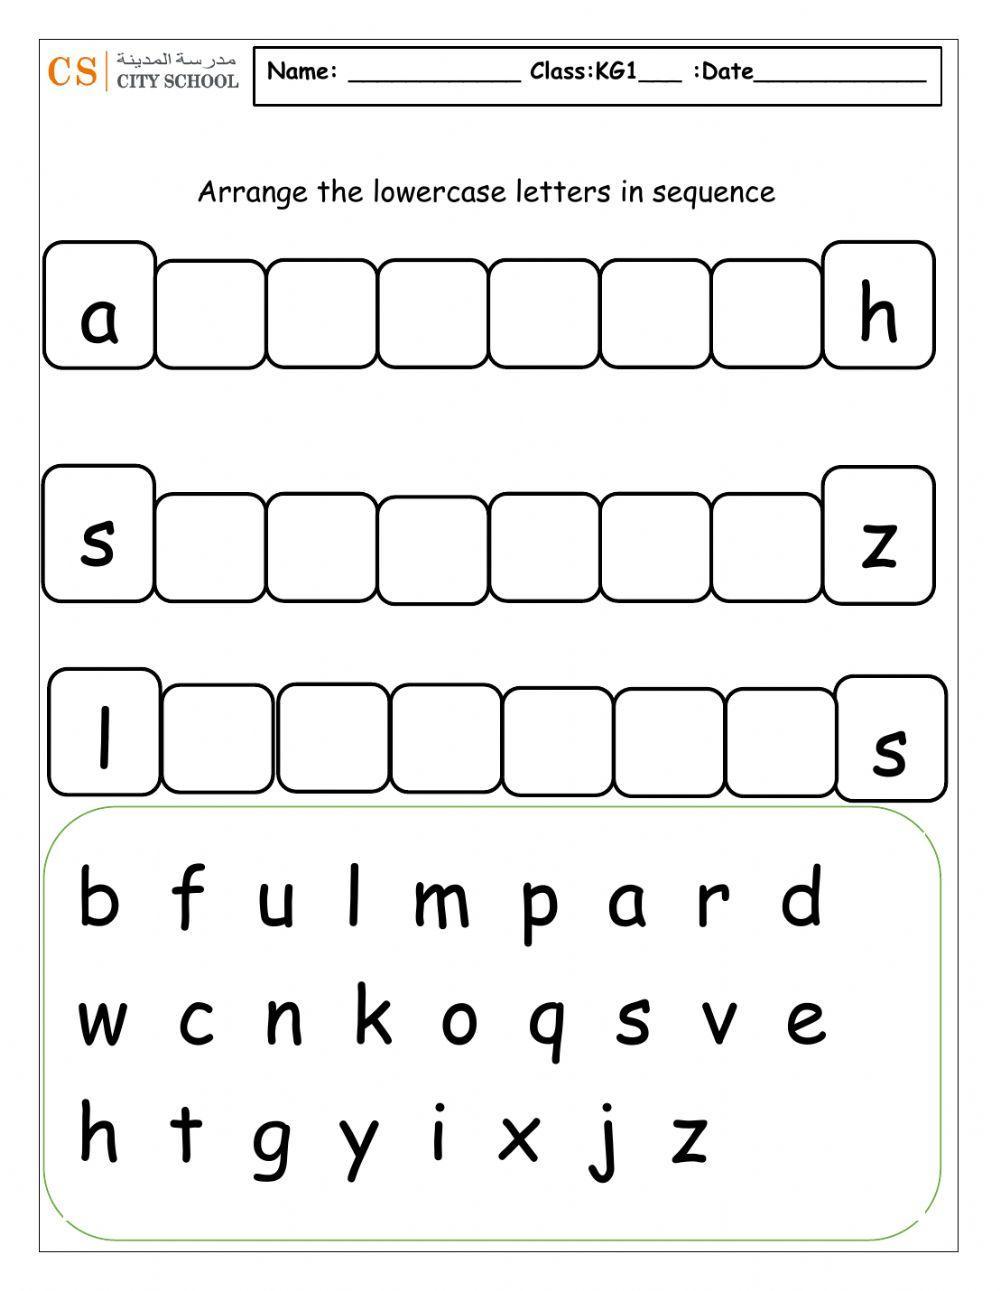 Lowercase sequence writing 2